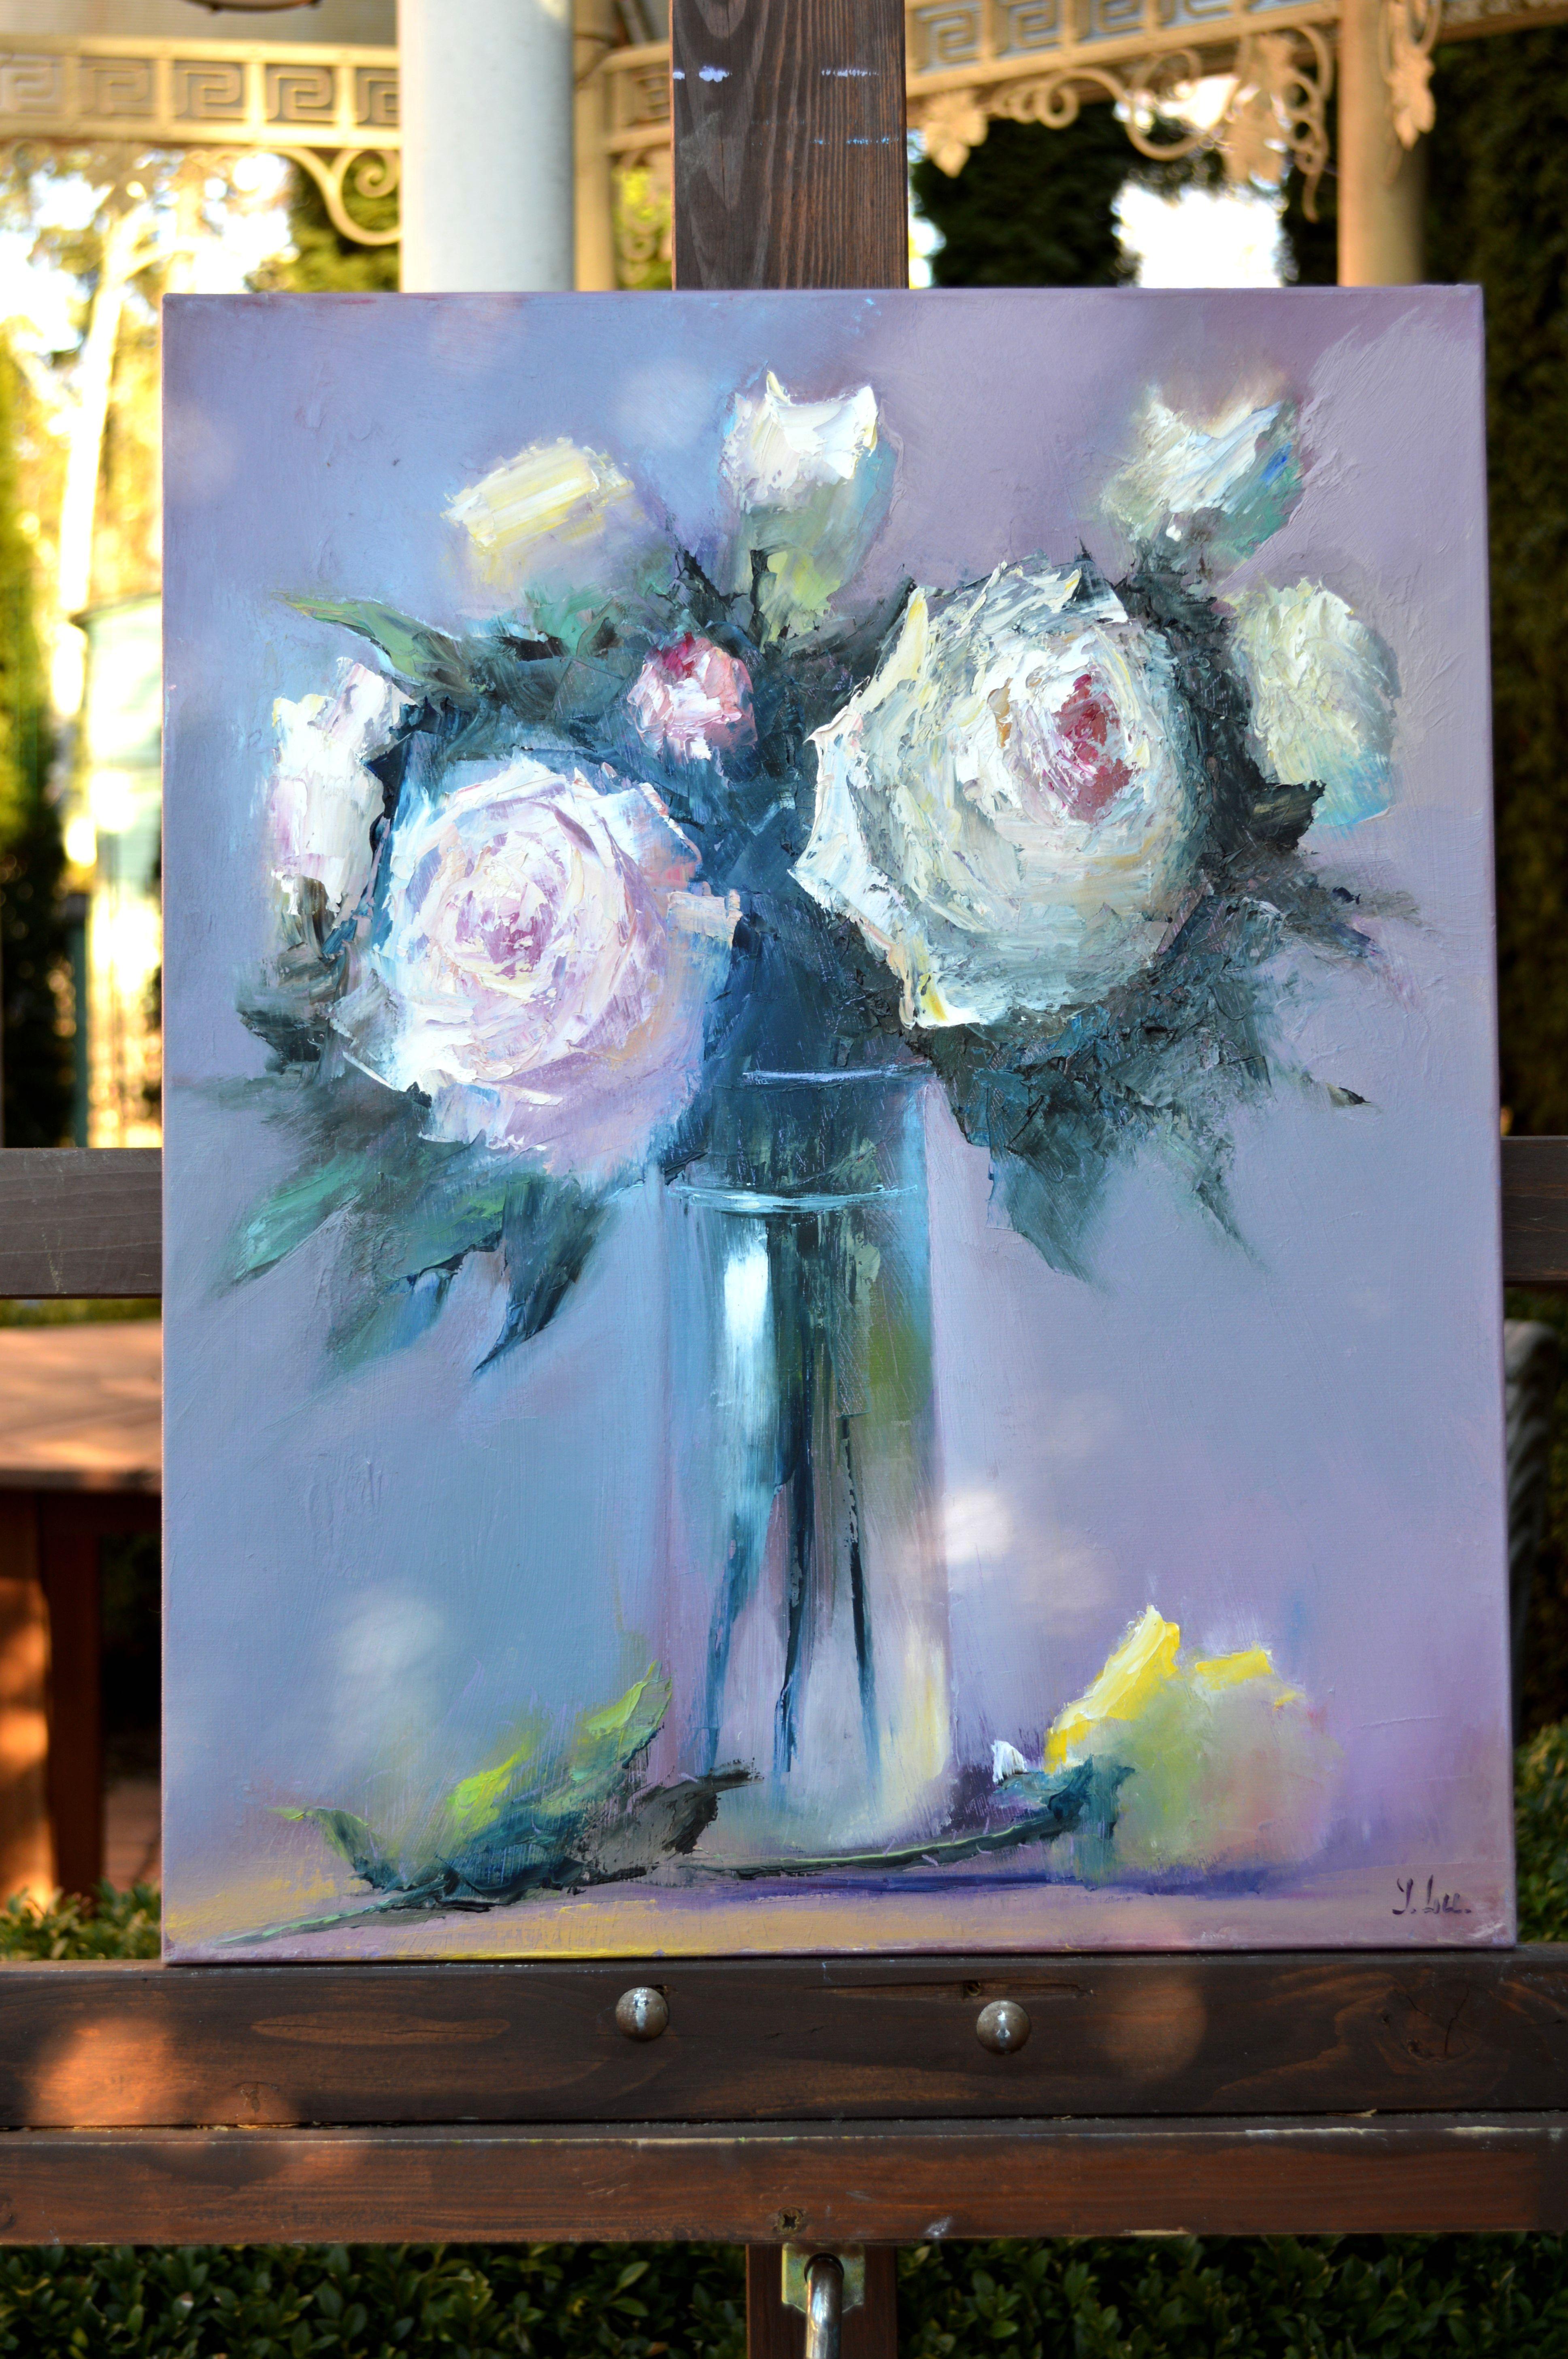 In this oil painting, I have poured my soul into capturing the timeless elegance of these blossoms. Swirling with emotion, they dance on the canvas—expressive brushstrokes marry realism with a vintage aura. I forged a moment of serene beauty, a